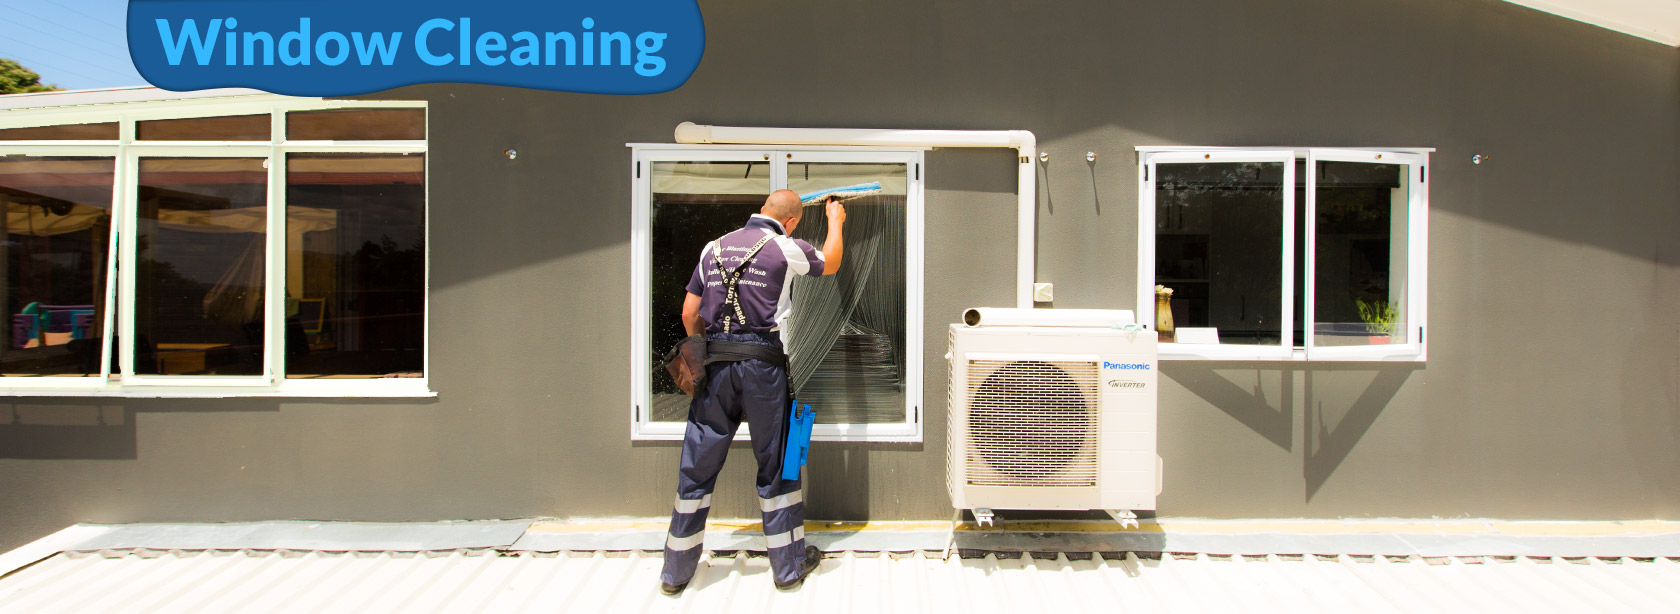 DMR-banner-Window-Cleaning